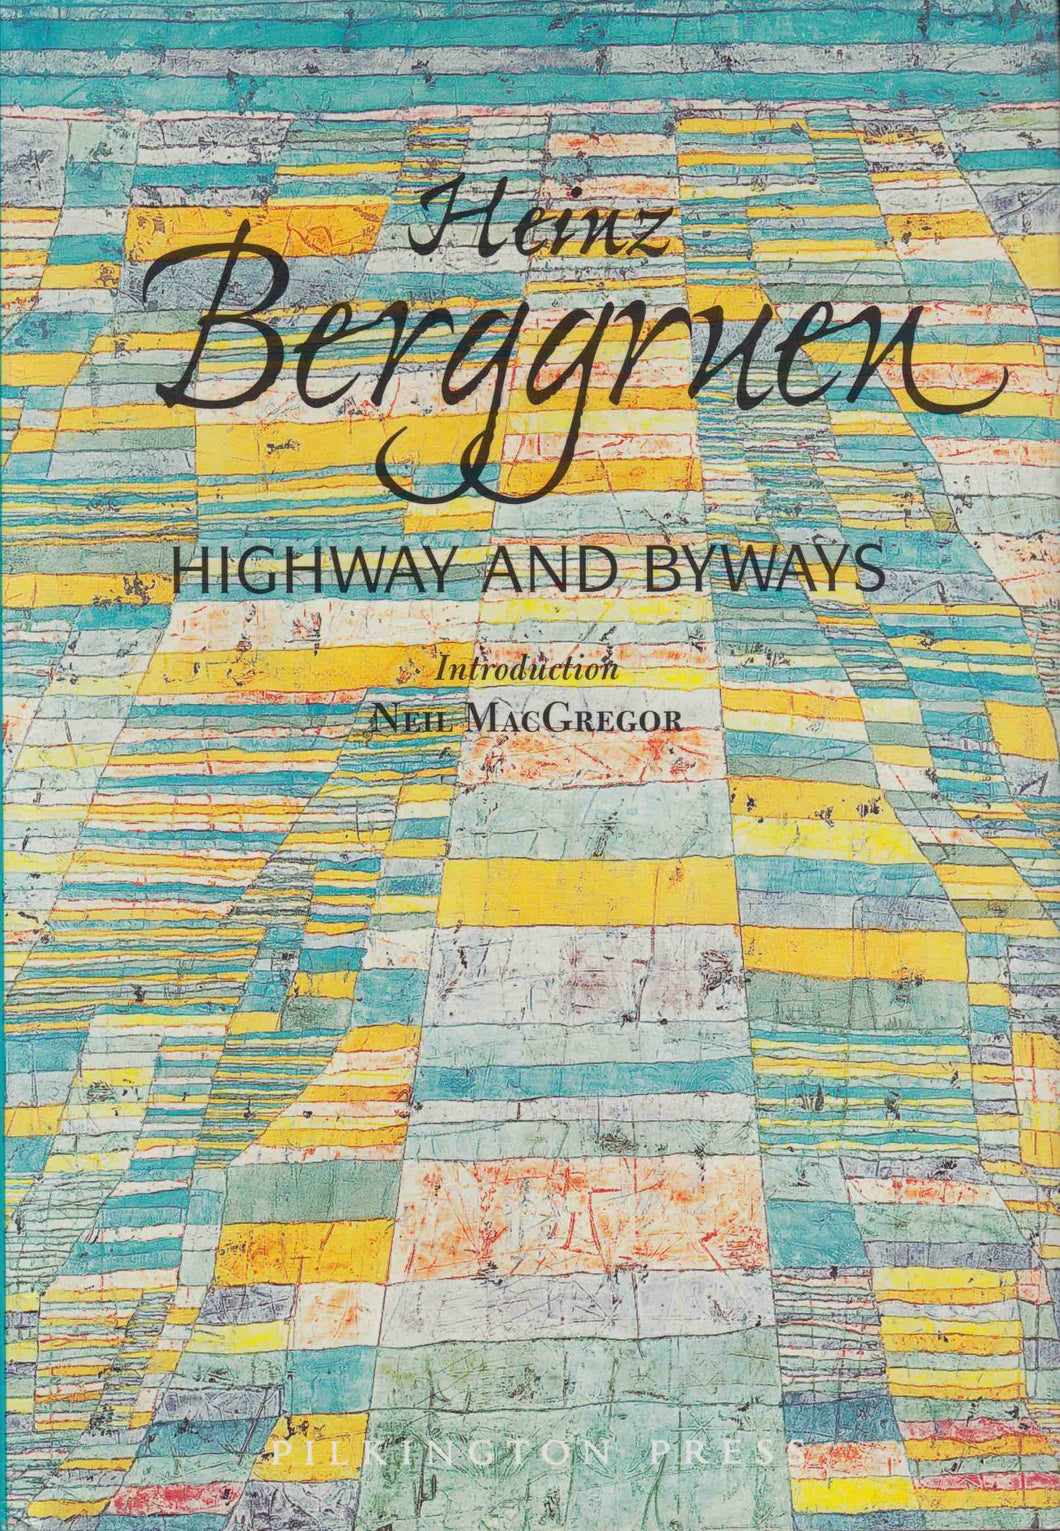 Highway and Byways